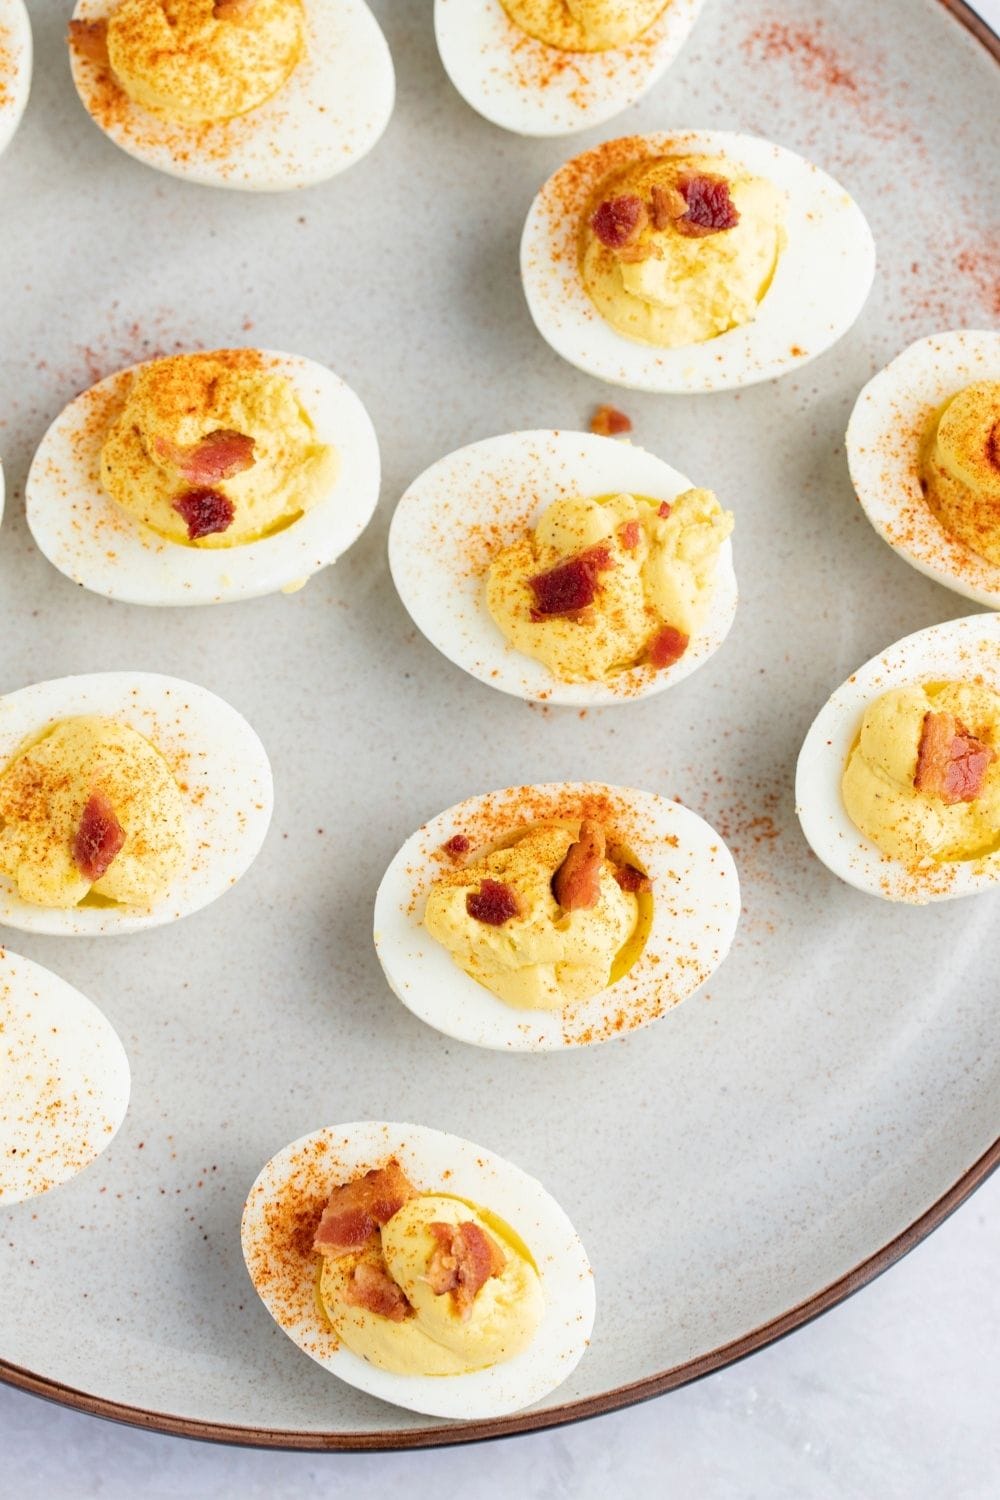 Bunch of Deviled Eggs garnished with paprika powder served on a plate